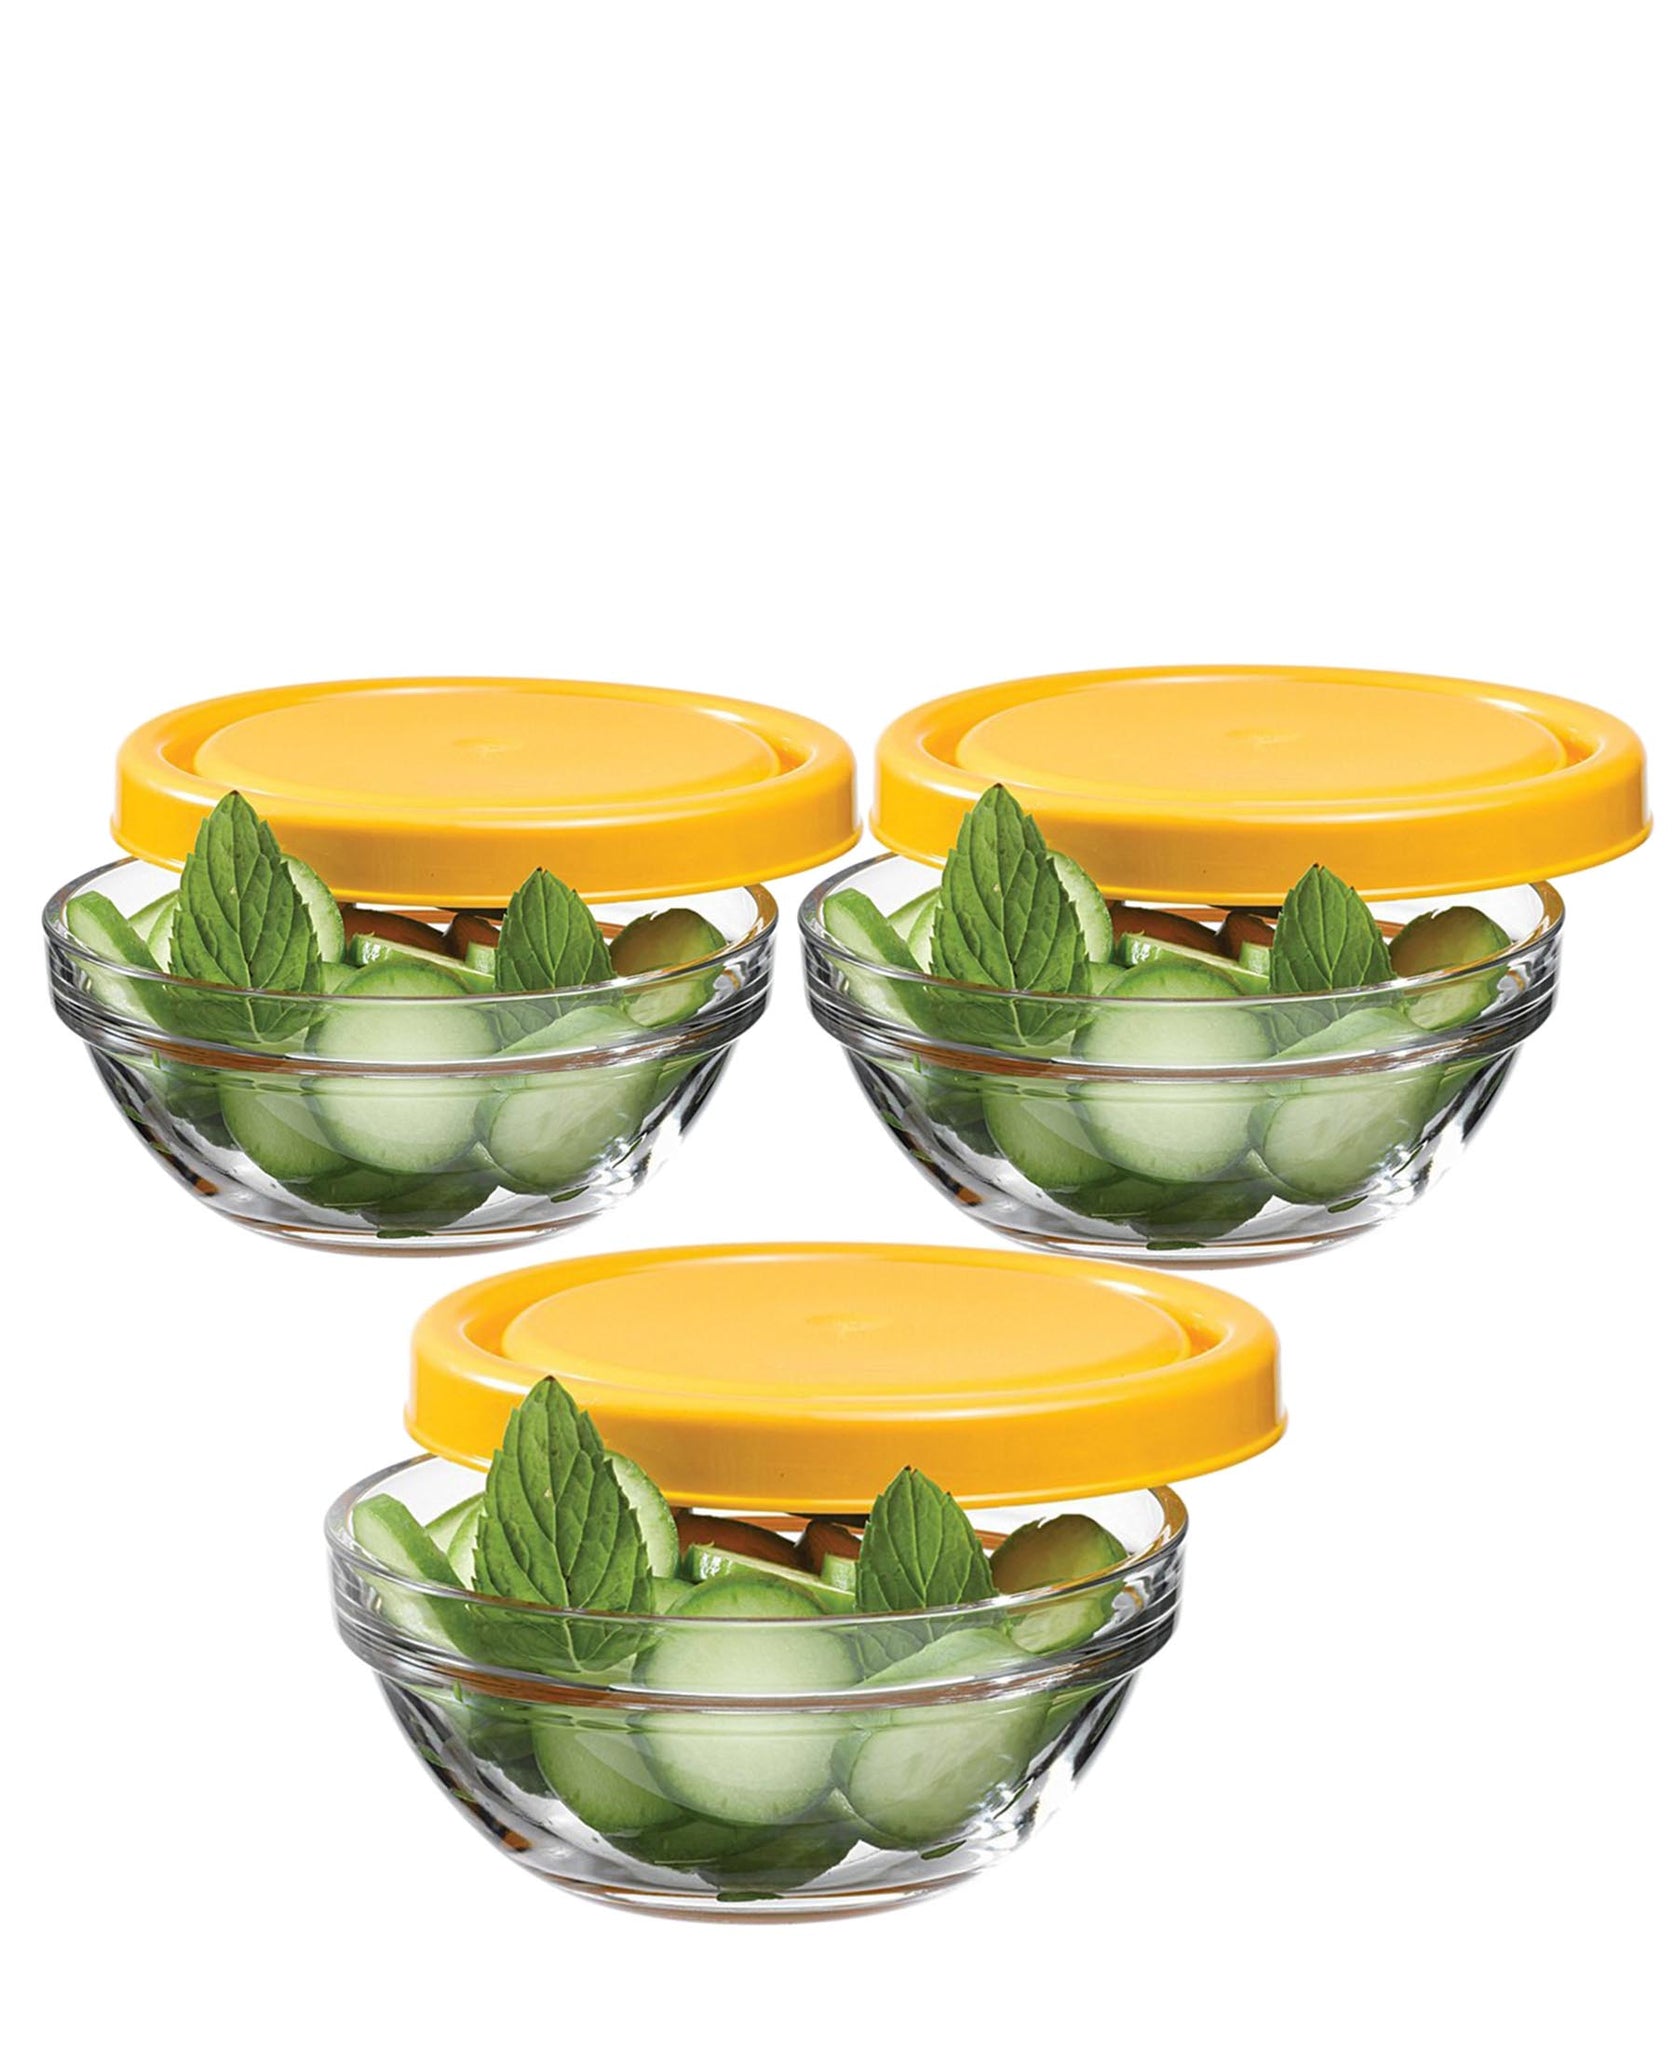 Chefs Bowl 3 Piece 140mm - Yellow